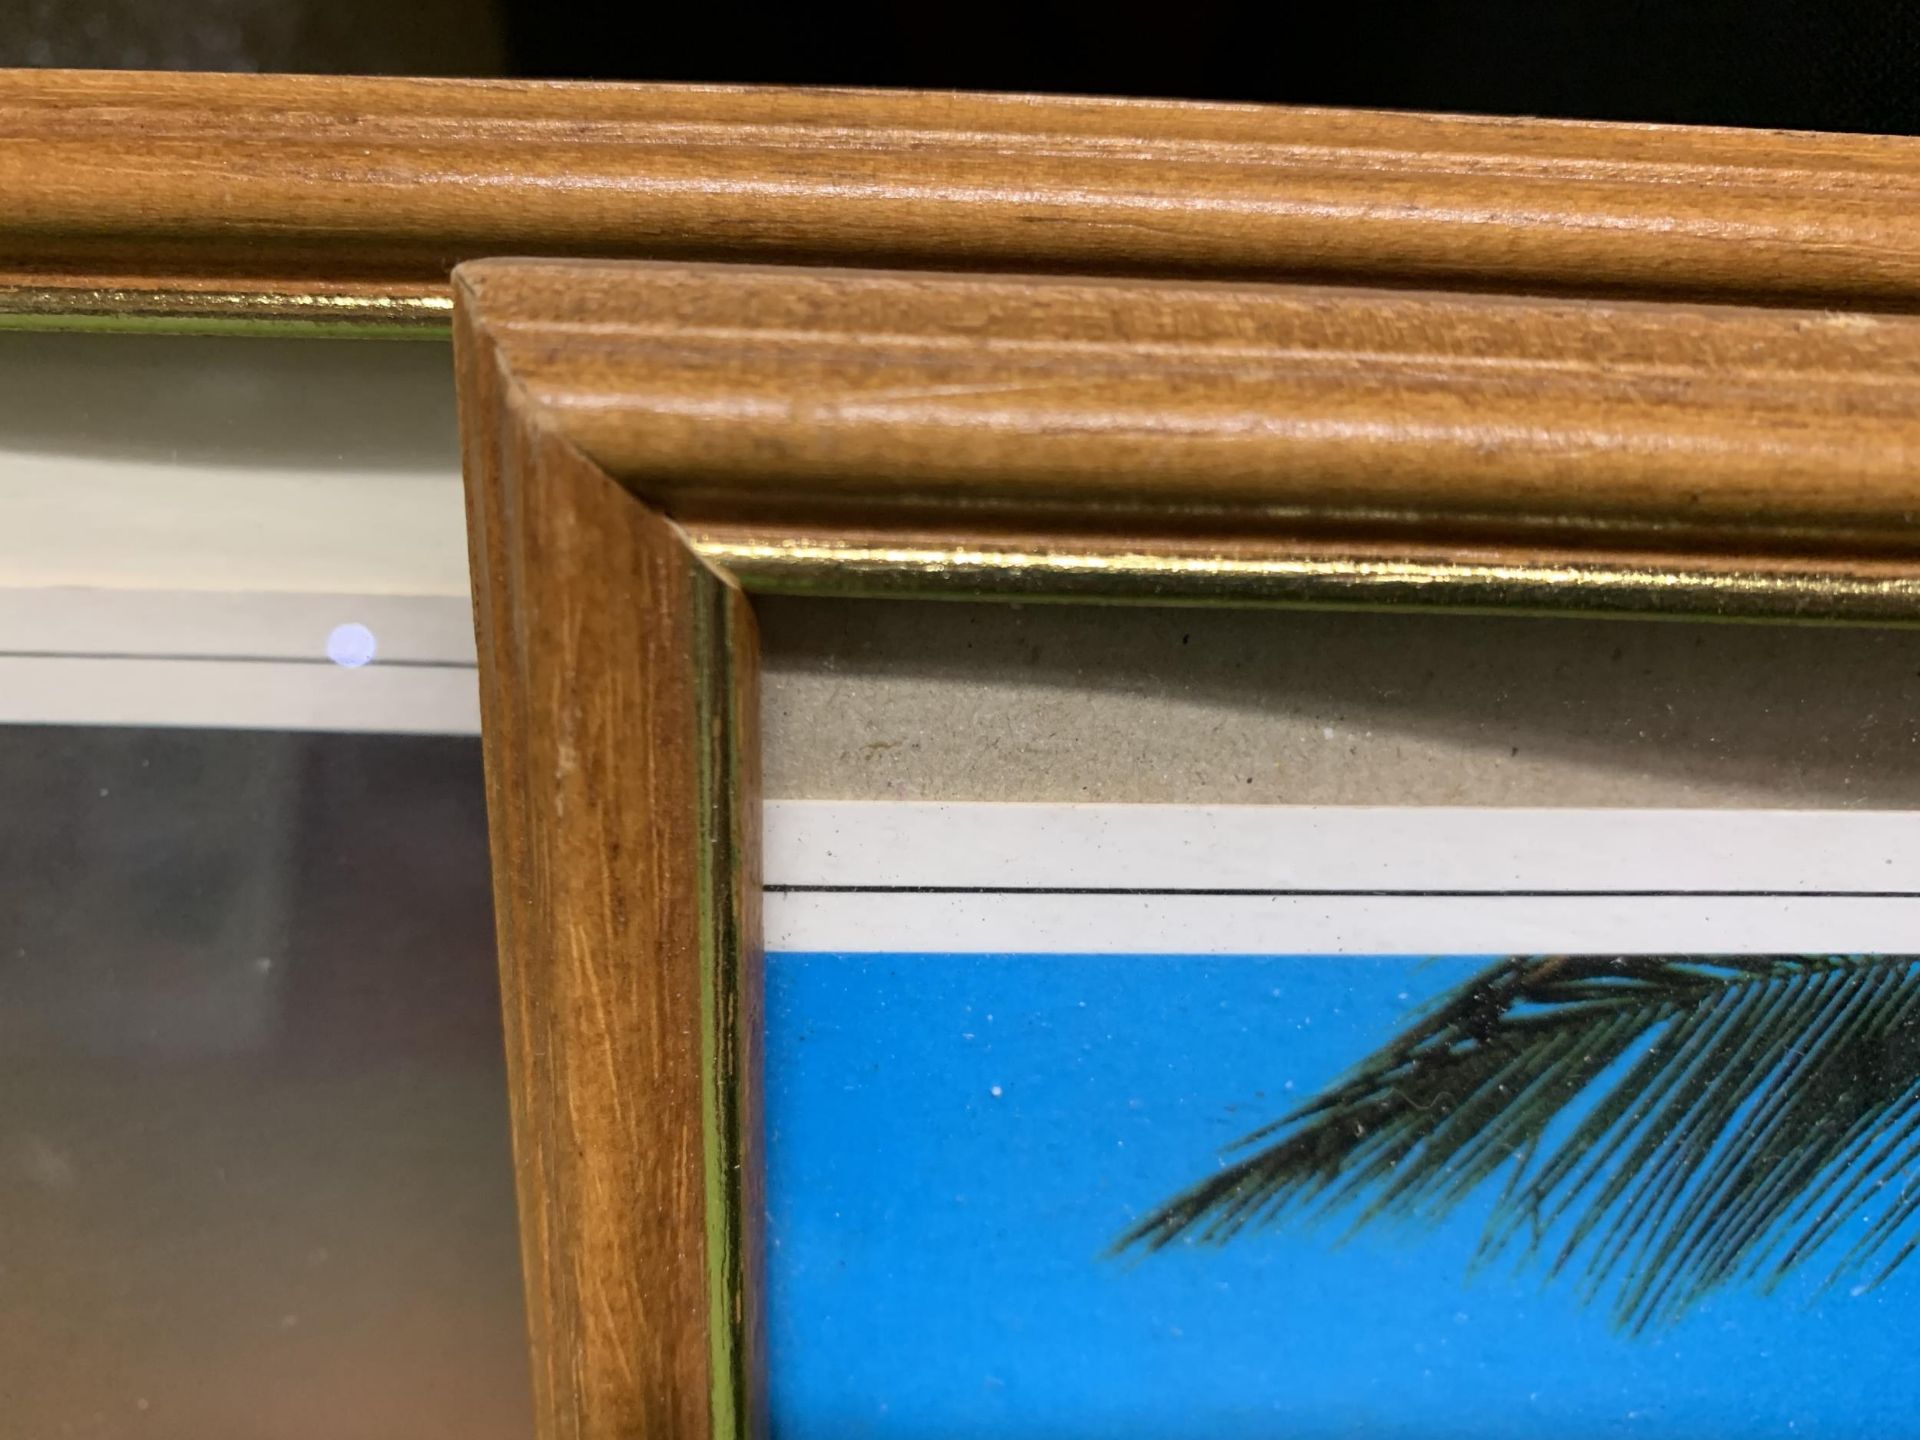 TWO FRAMED PRINTS, ONE OF SUNSET OVER THE GREAT BARRIER REEF, THE OTHER FOUR MILE BEACH, PORT - Image 4 of 4